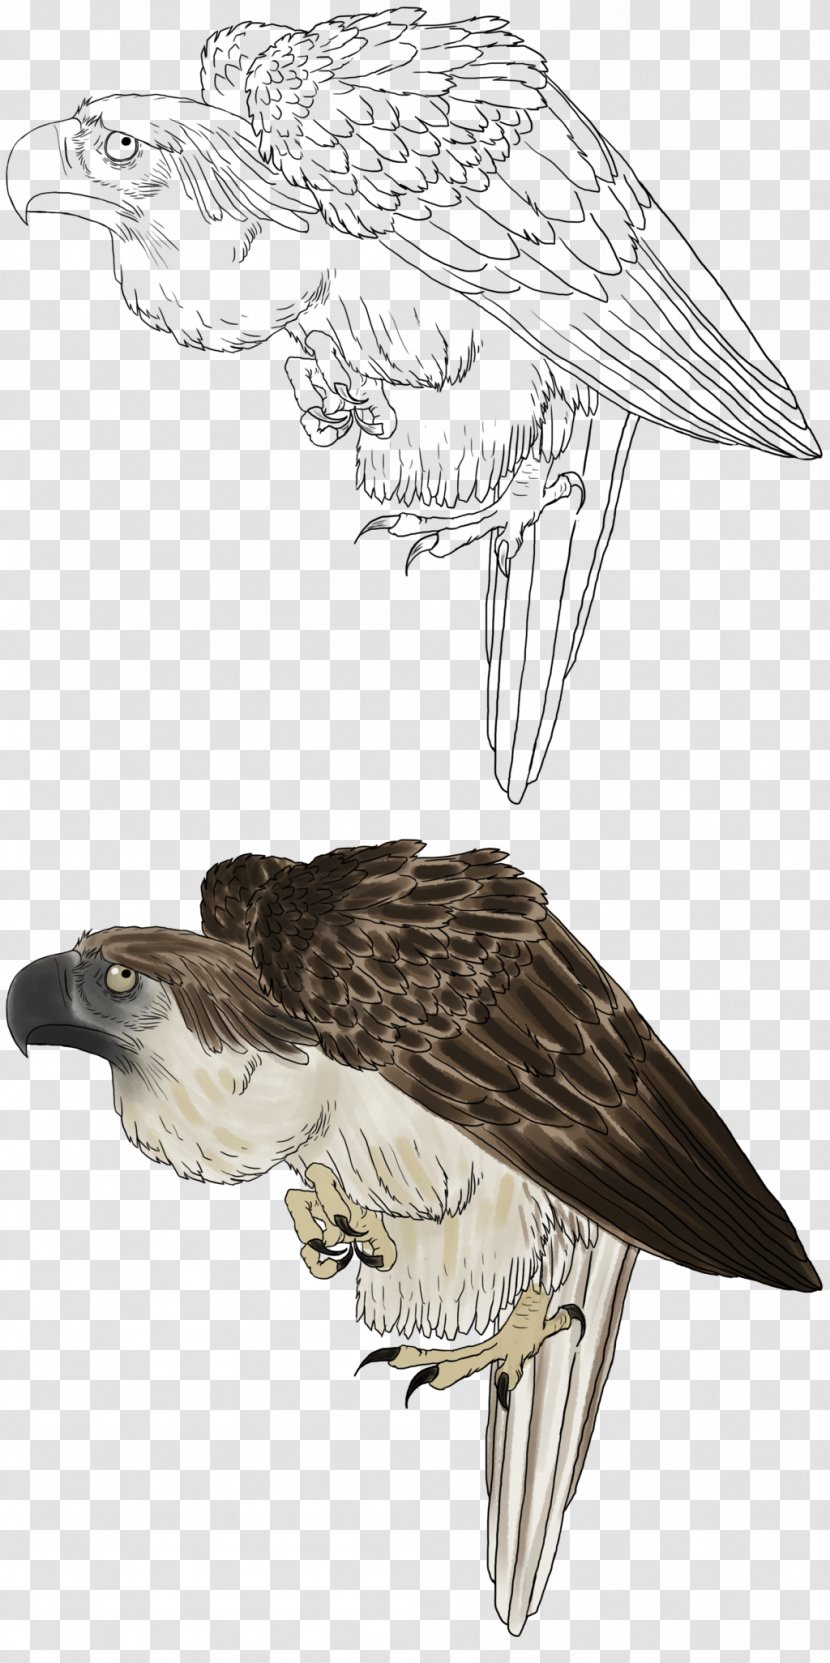 Bald Eagle Philippines Hawk Philippine White-tailed - Bird Of Prey - Enlarged Drawing Transparent PNG